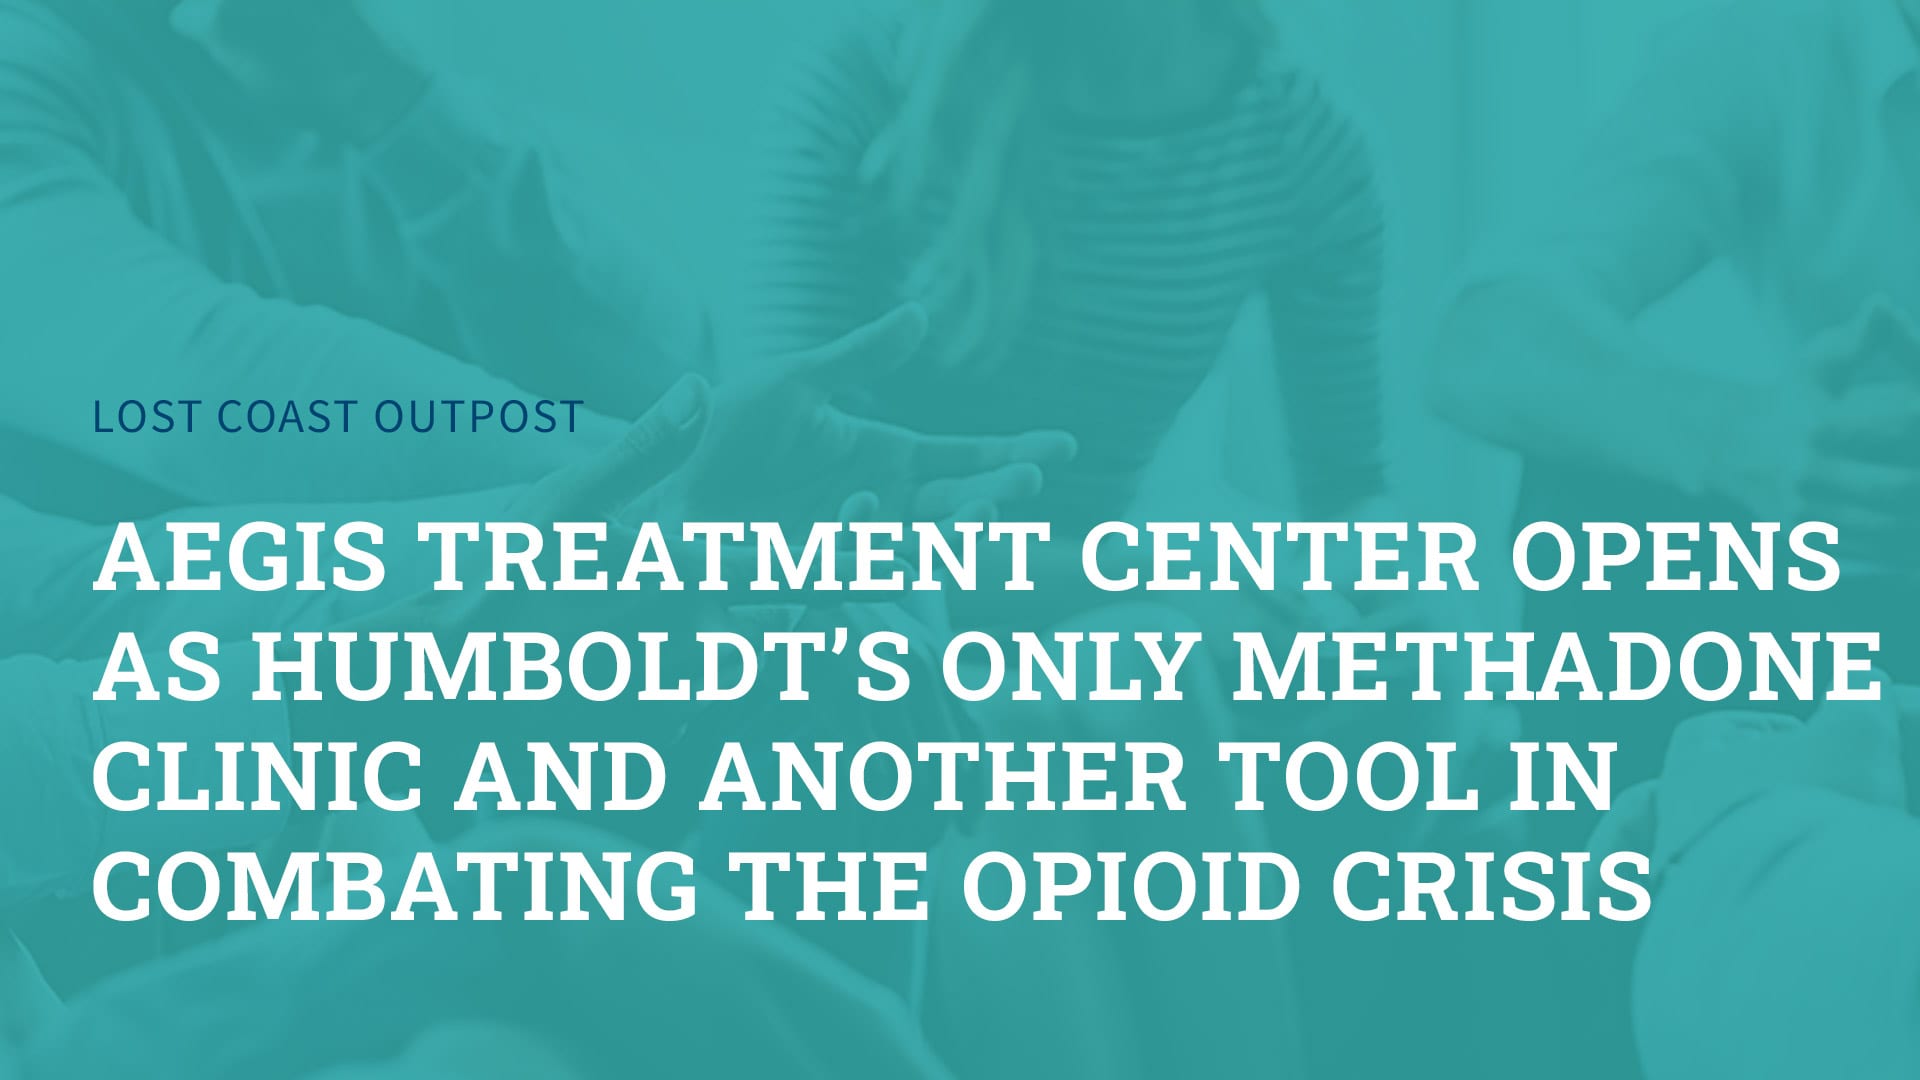 aegis treatment center opens as Humboldt's only methadone clinic and another tool in combating the opioid crisis